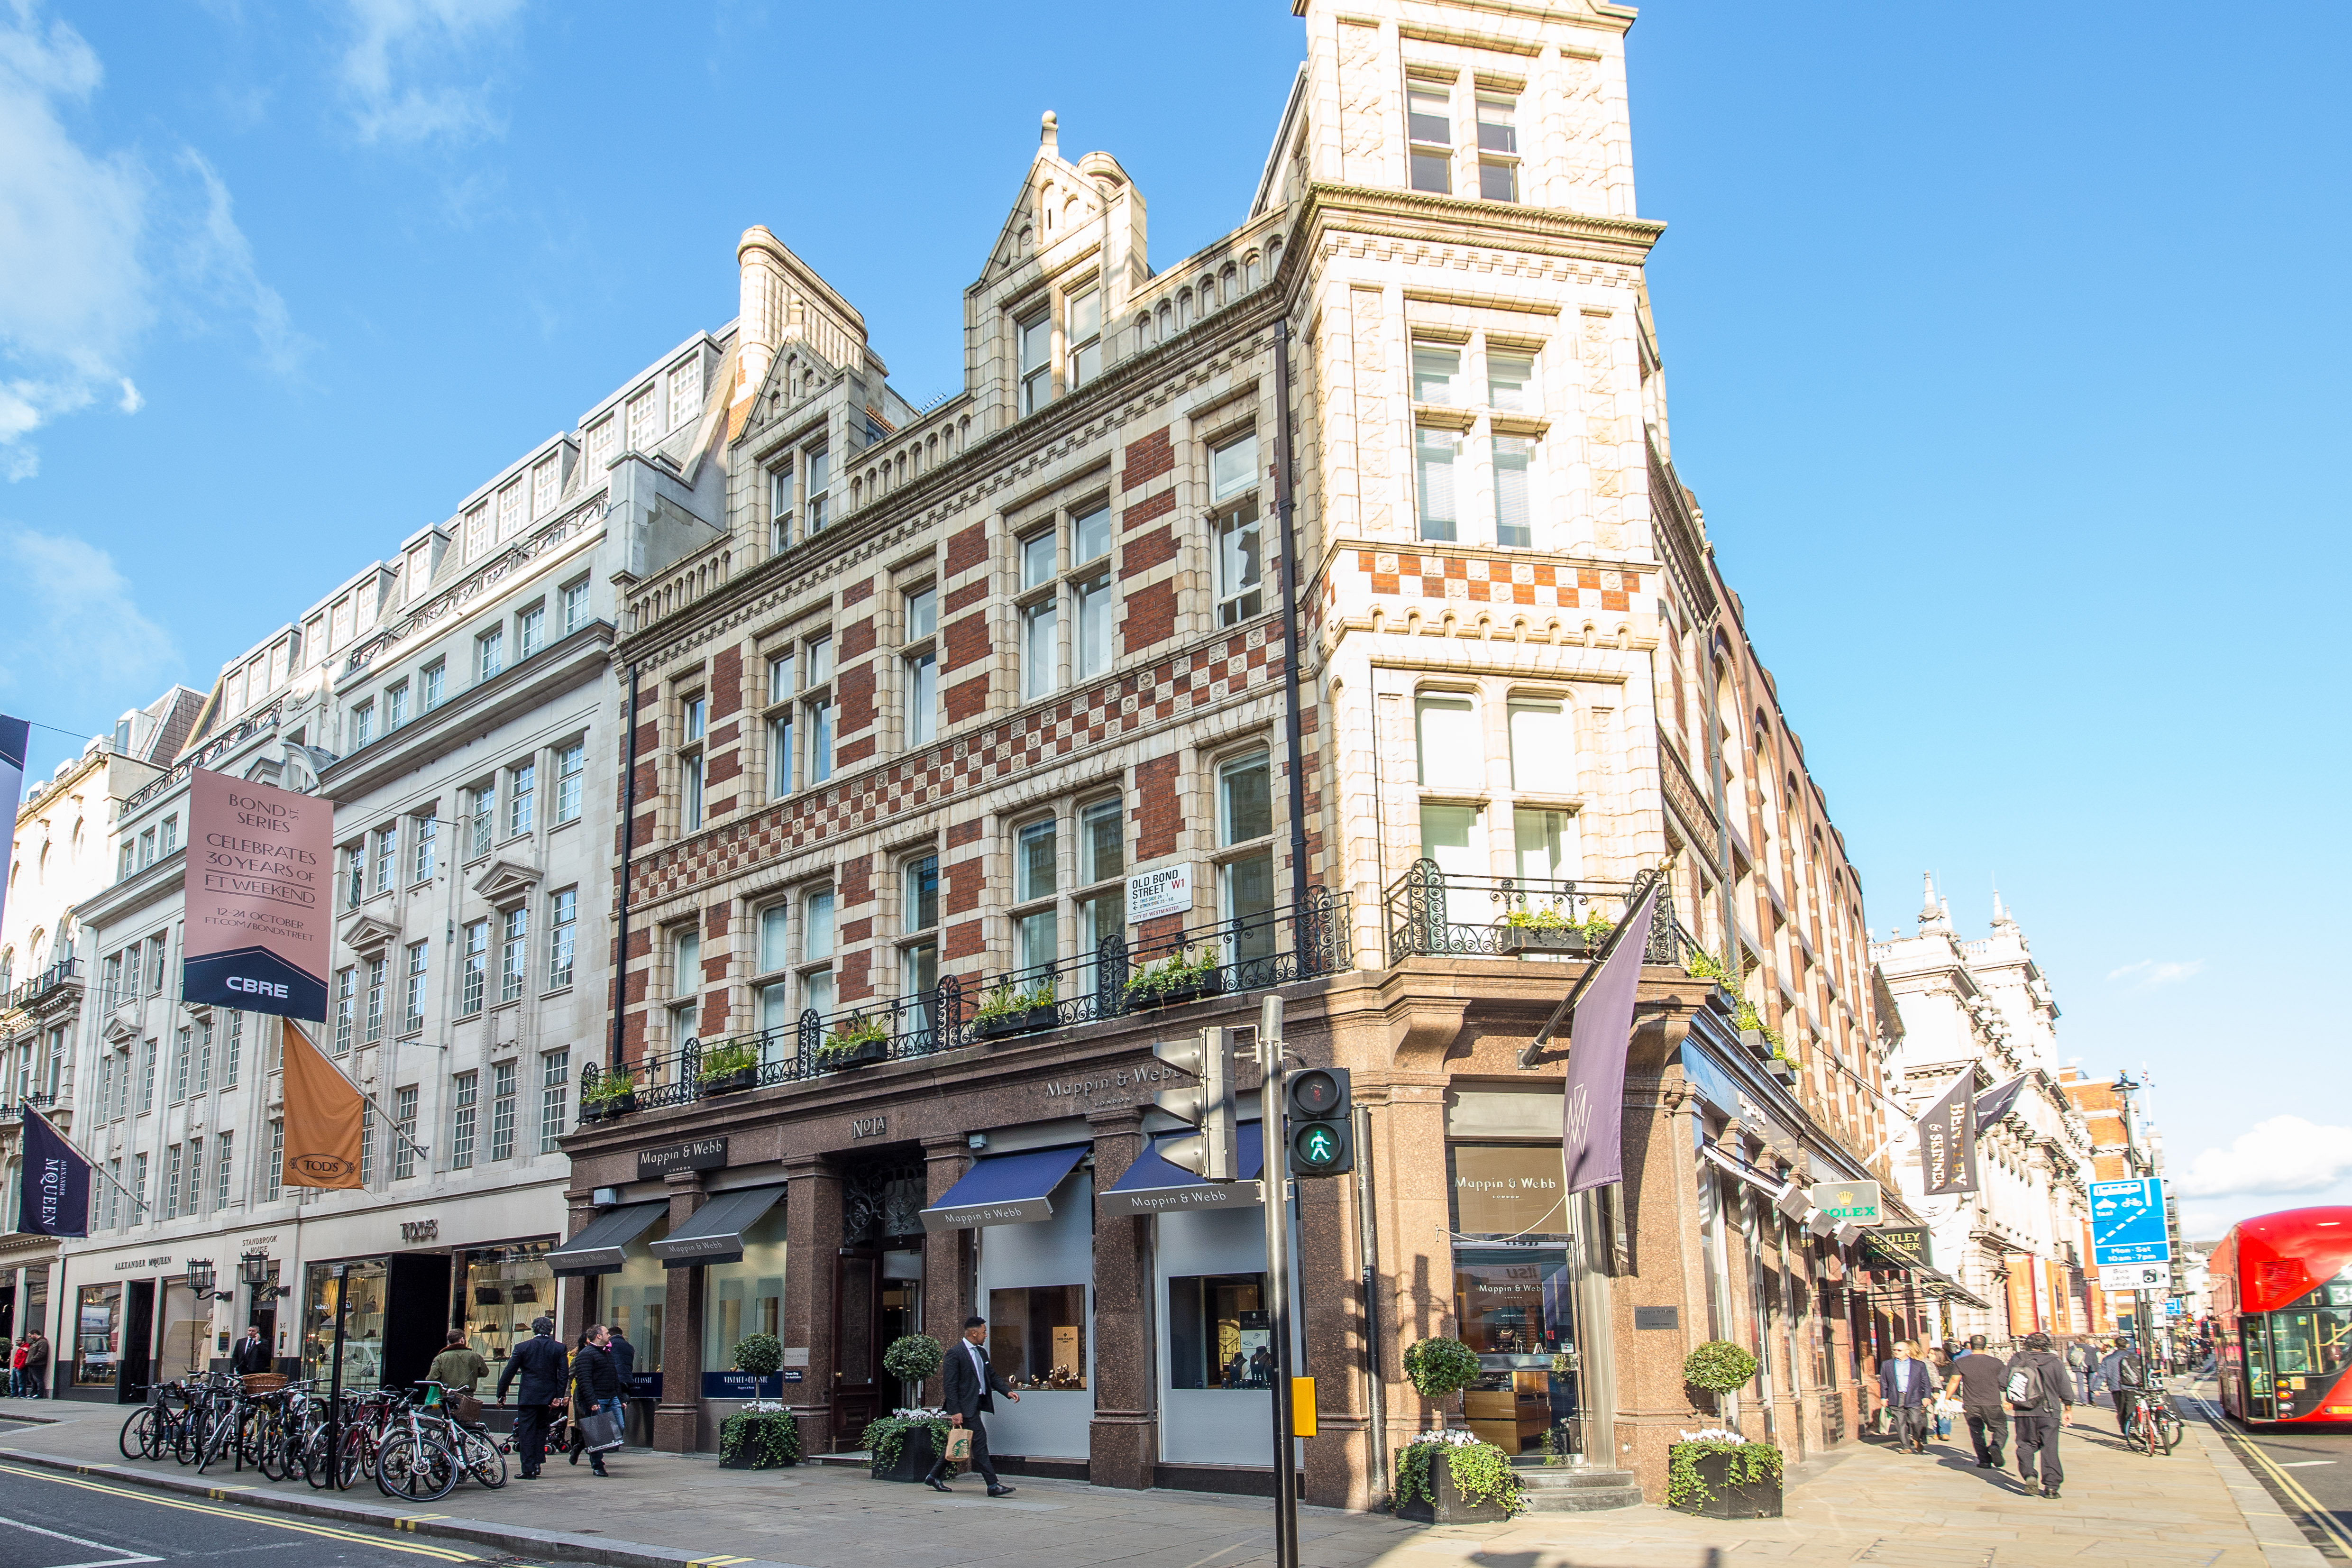 New Bond Street in London: 1 reviews and 4 photos